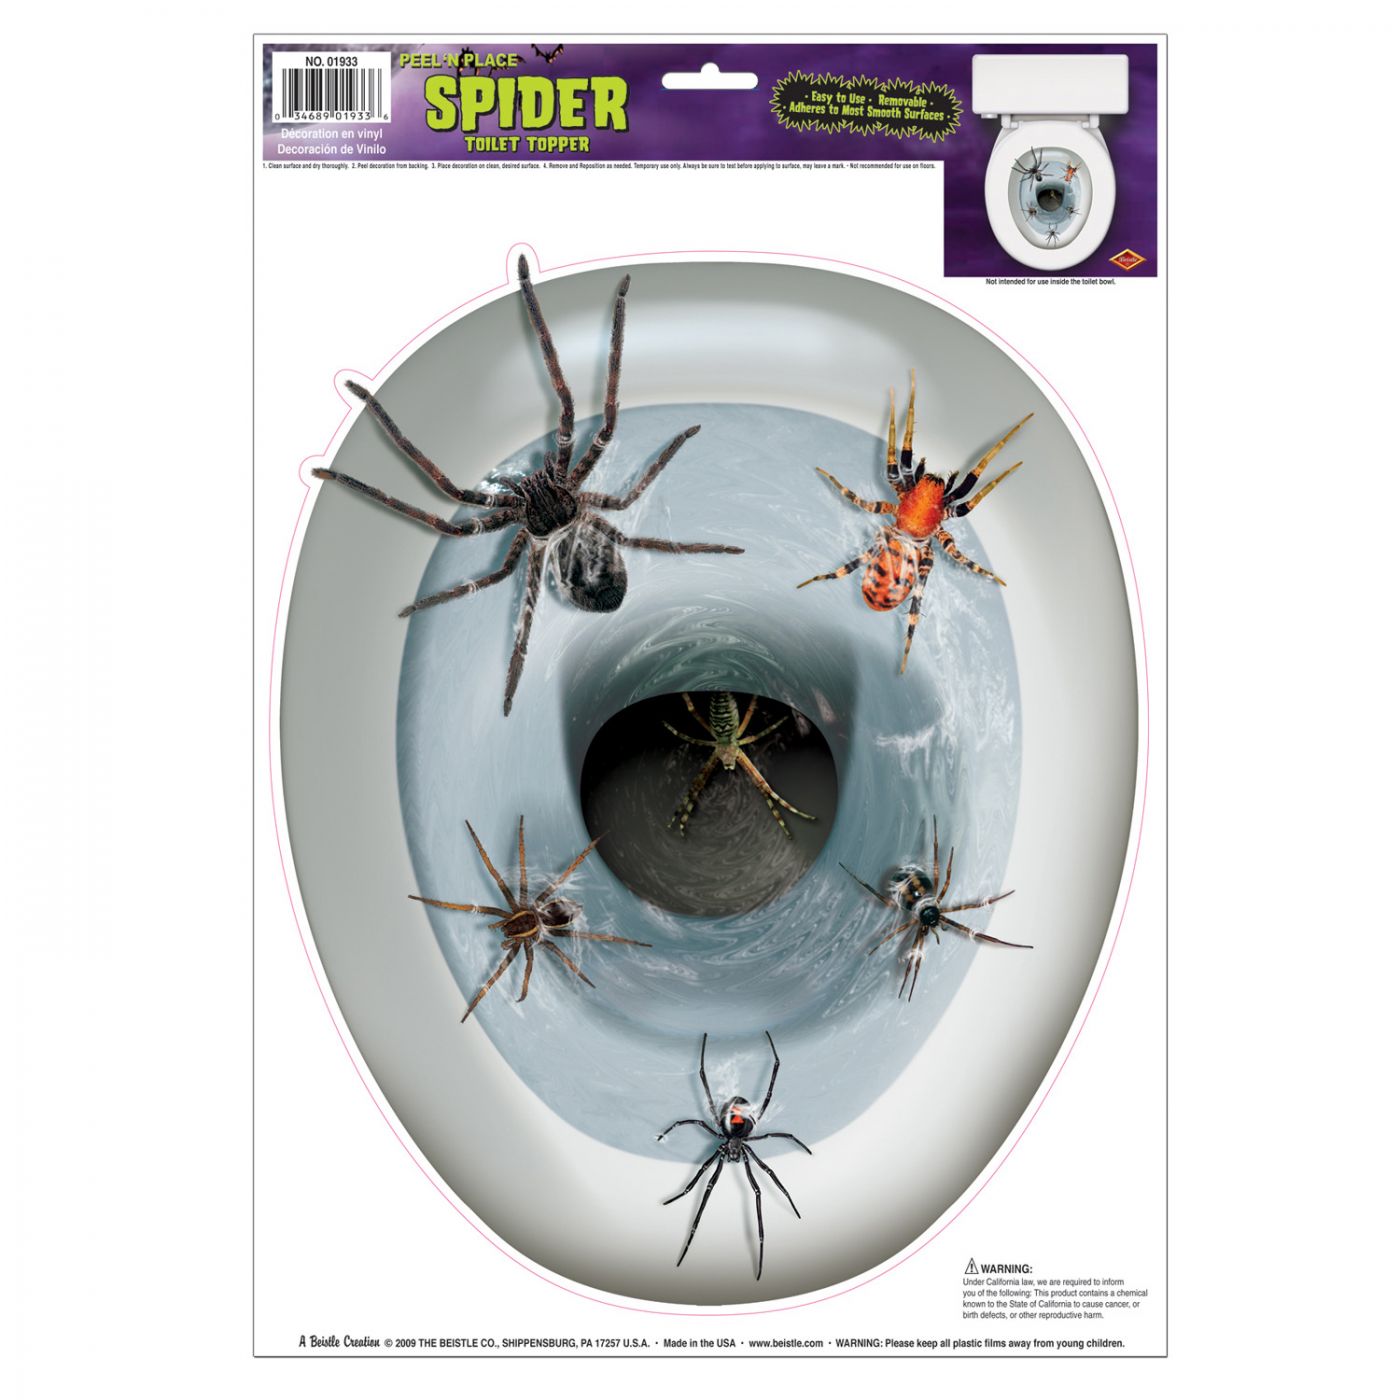 Spider Toilet Topper Peel 'N Place image